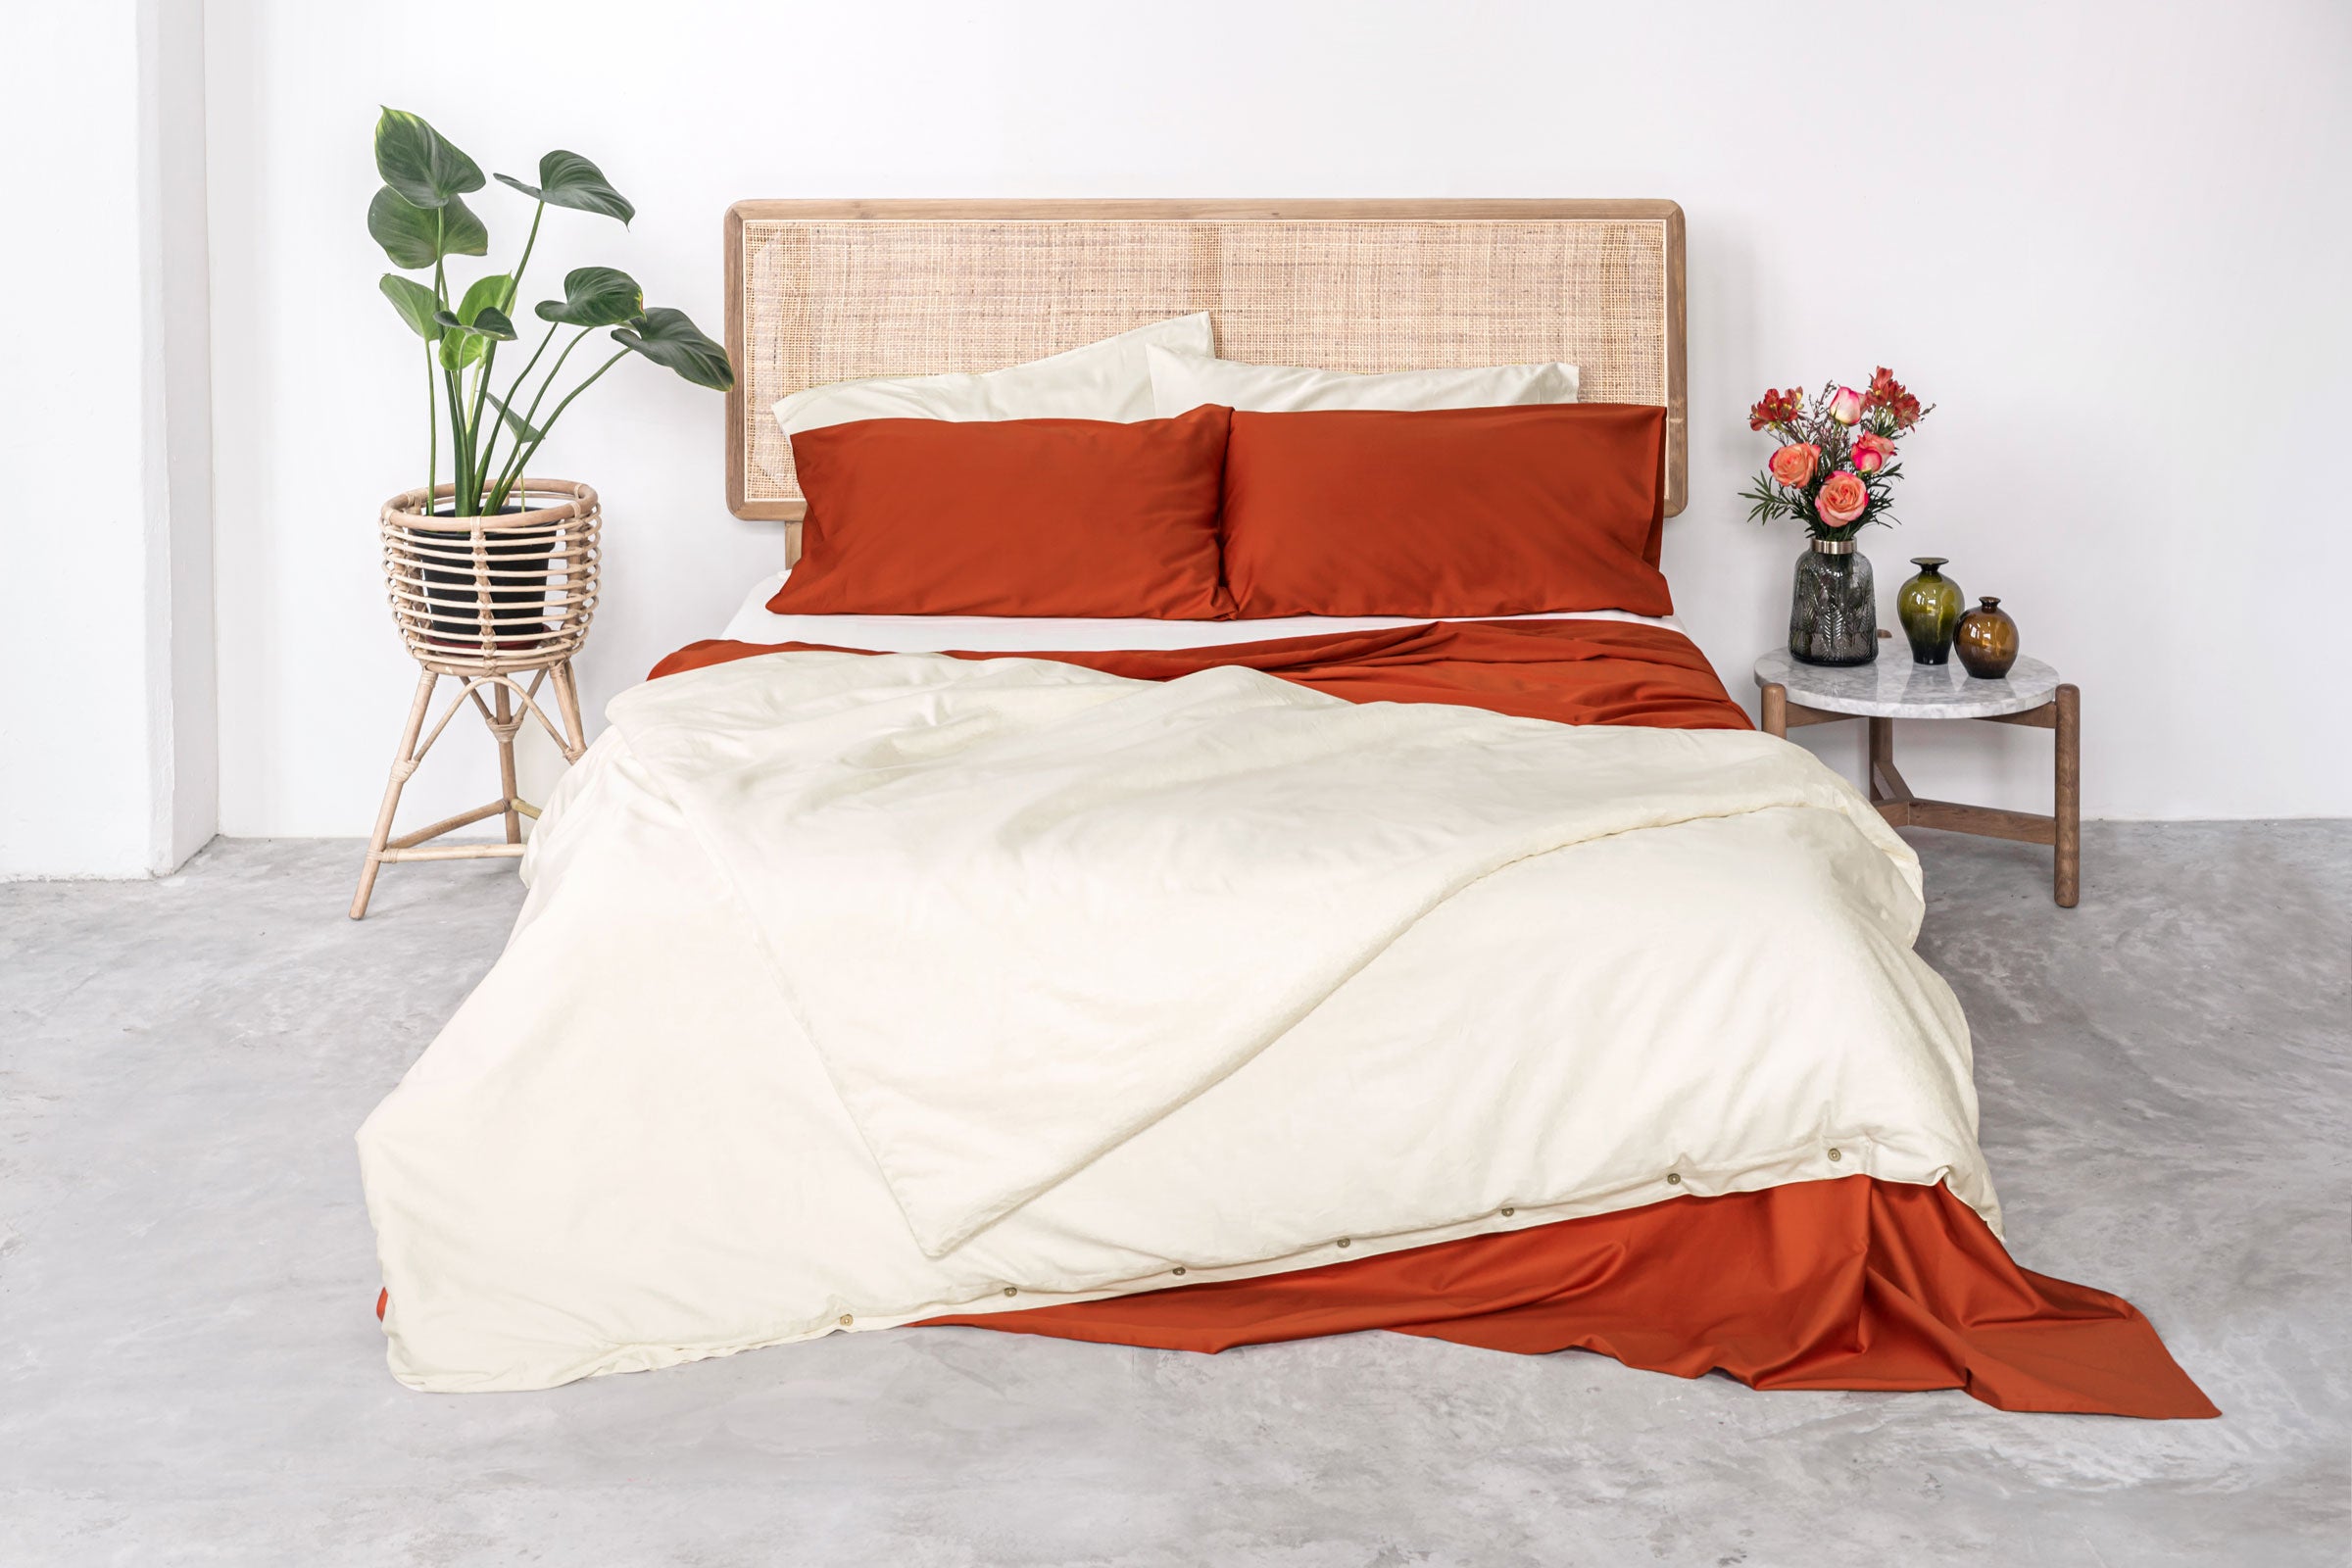 classic-natural-duvet-cover-fitted-sheet-pillowcase-pair-autumn-pillowcase-pair-flat-sheet-by-sojao.jpg